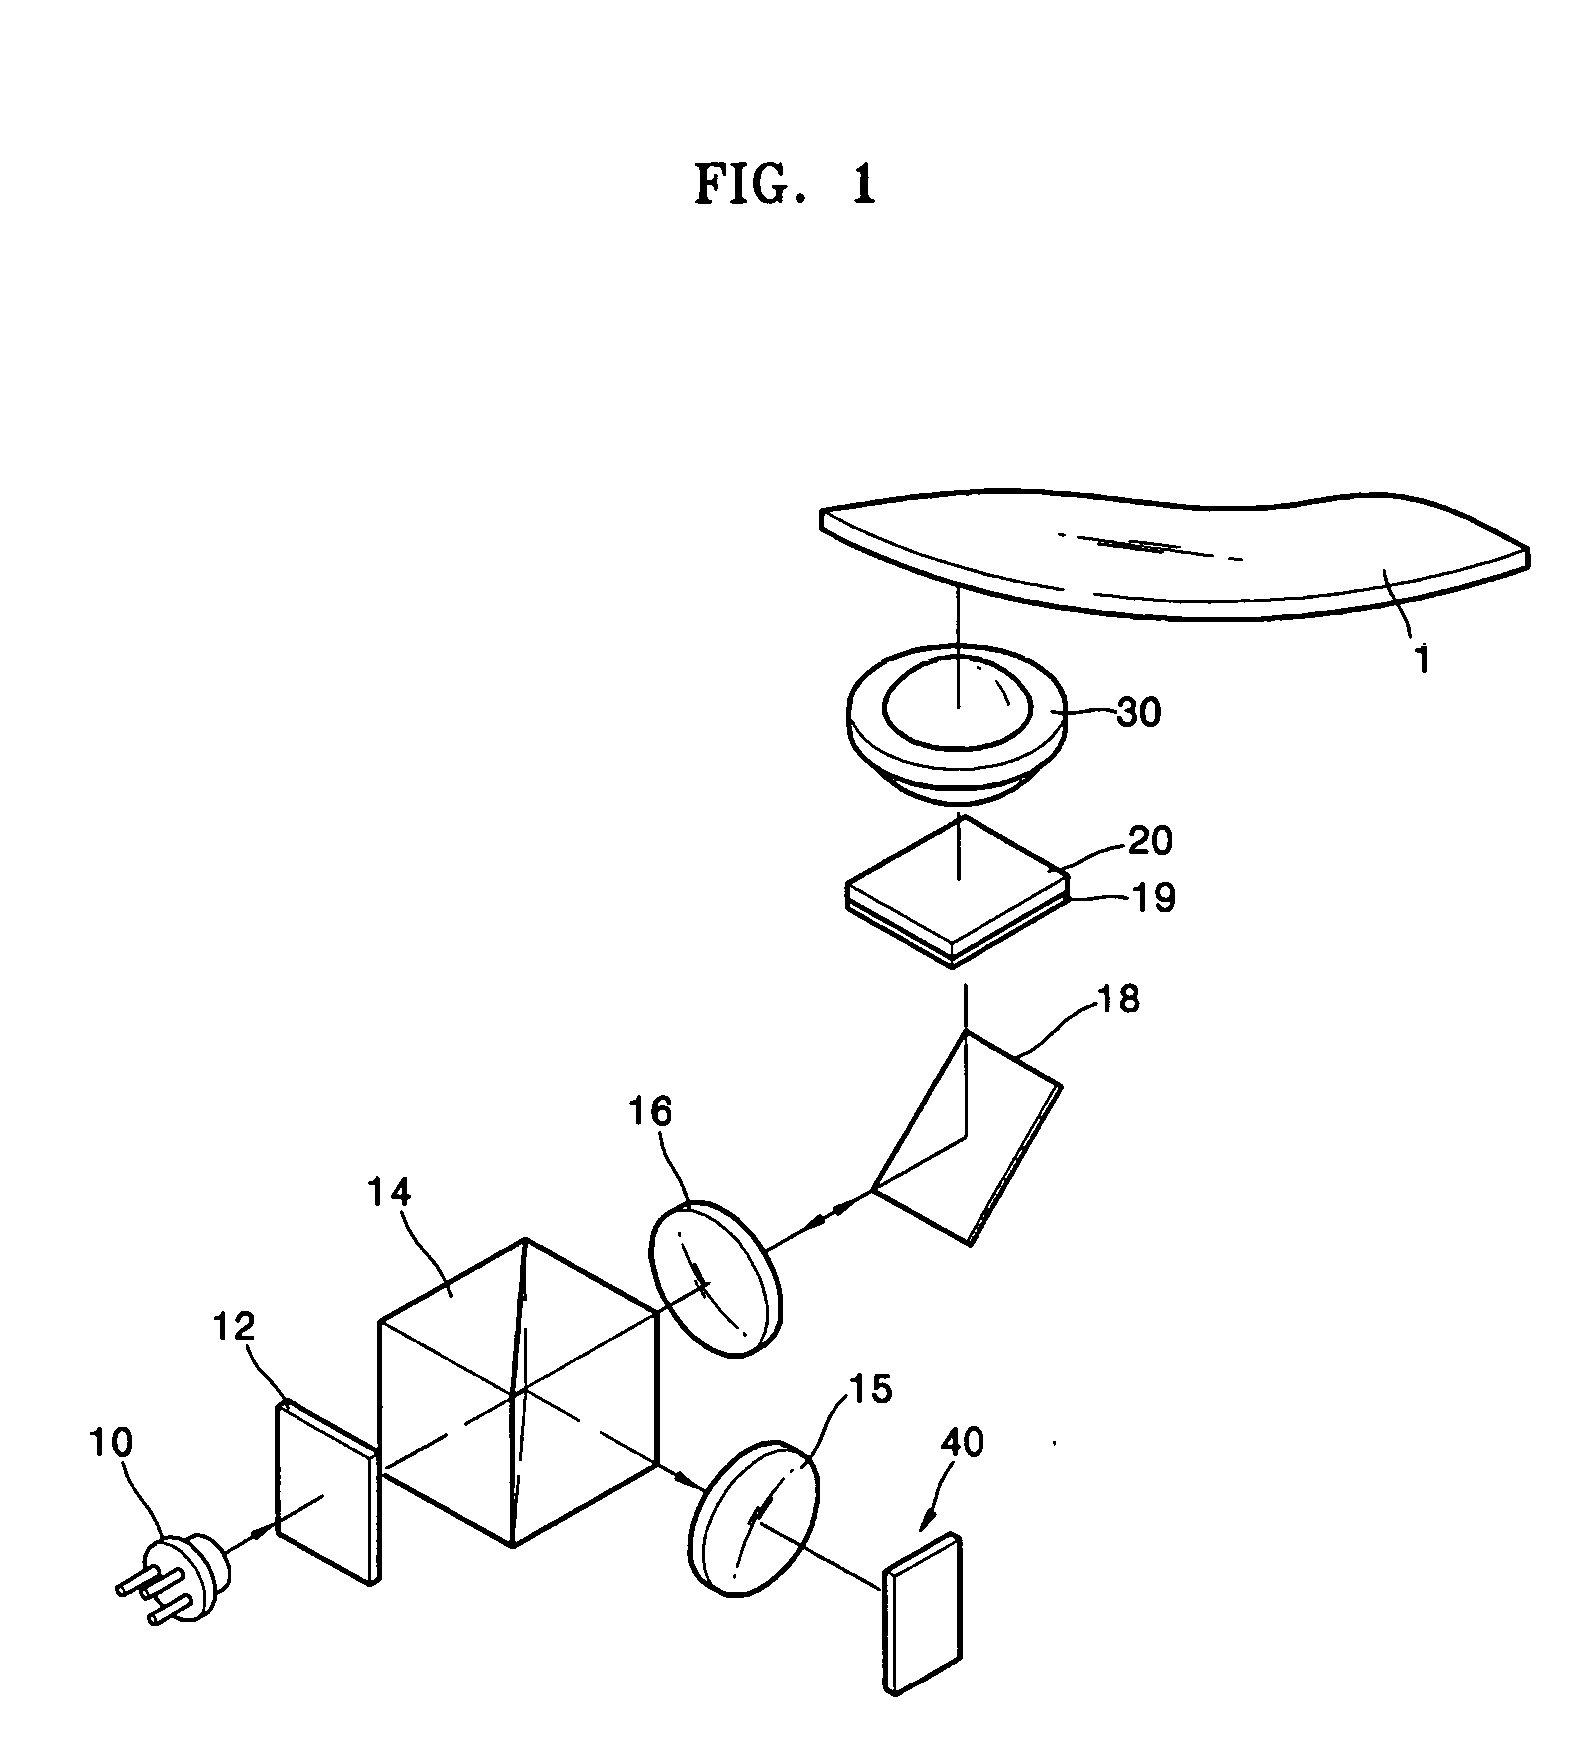 Liquid crystal device for compensating for aberration, optical pickup including liquid crystal device, and optical recording and/or reproducing apparatus employing optical pickup